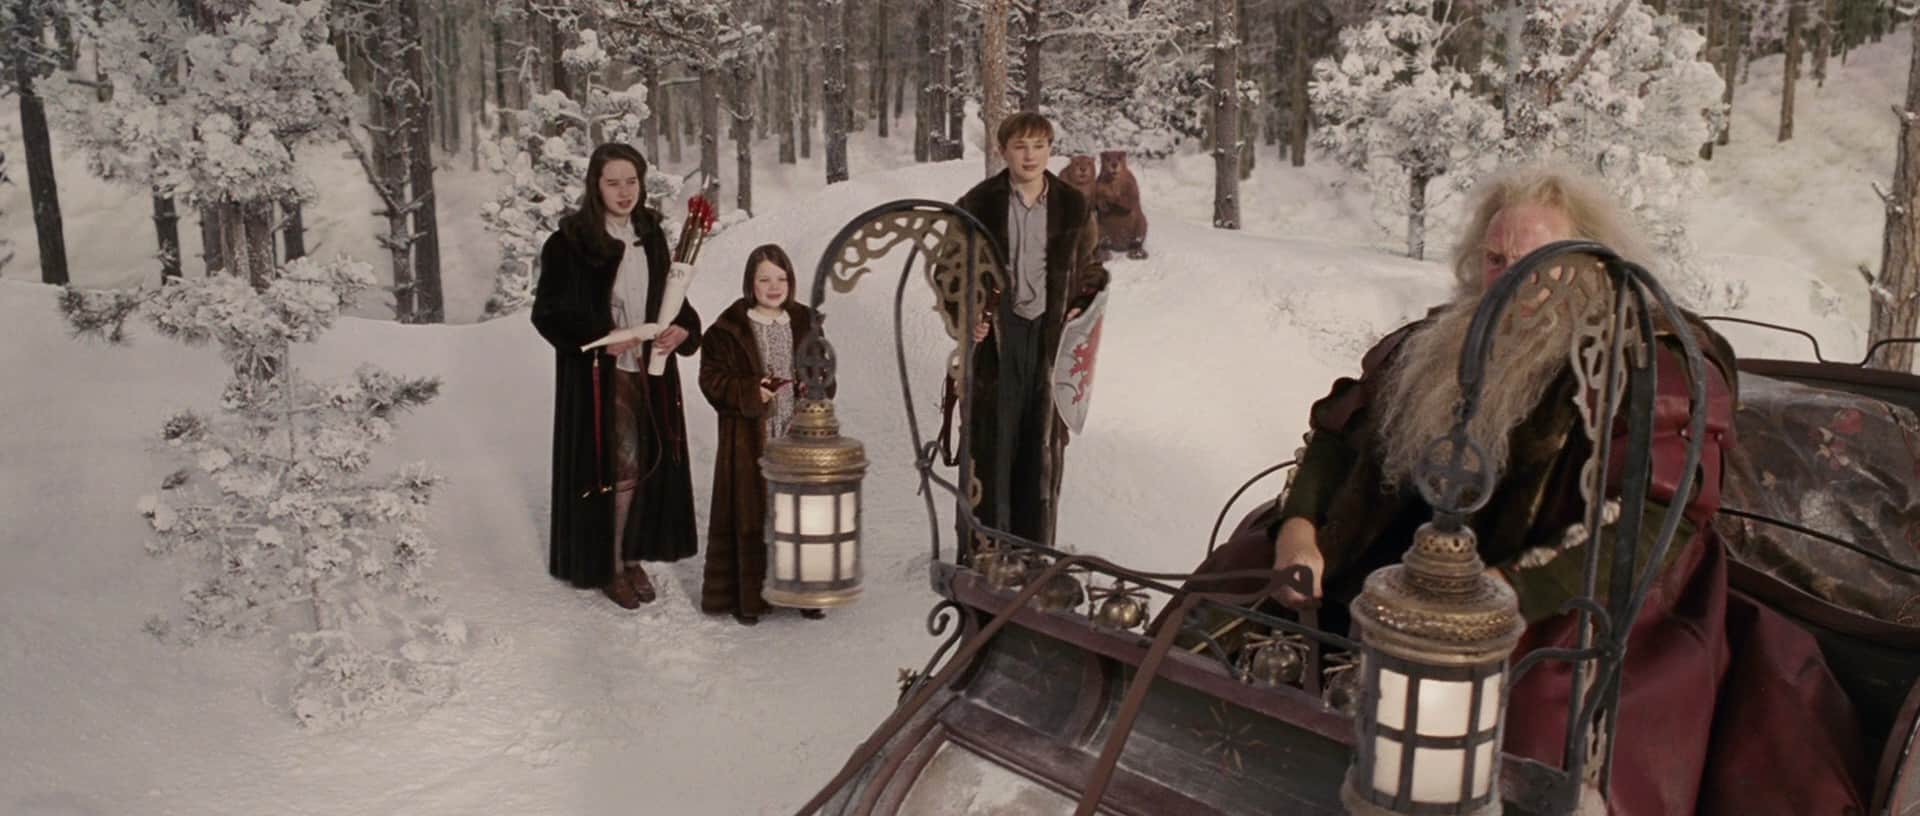  Children stand in a snowy forest near a man in a sleigh in this image from Walt Disney Pictures.